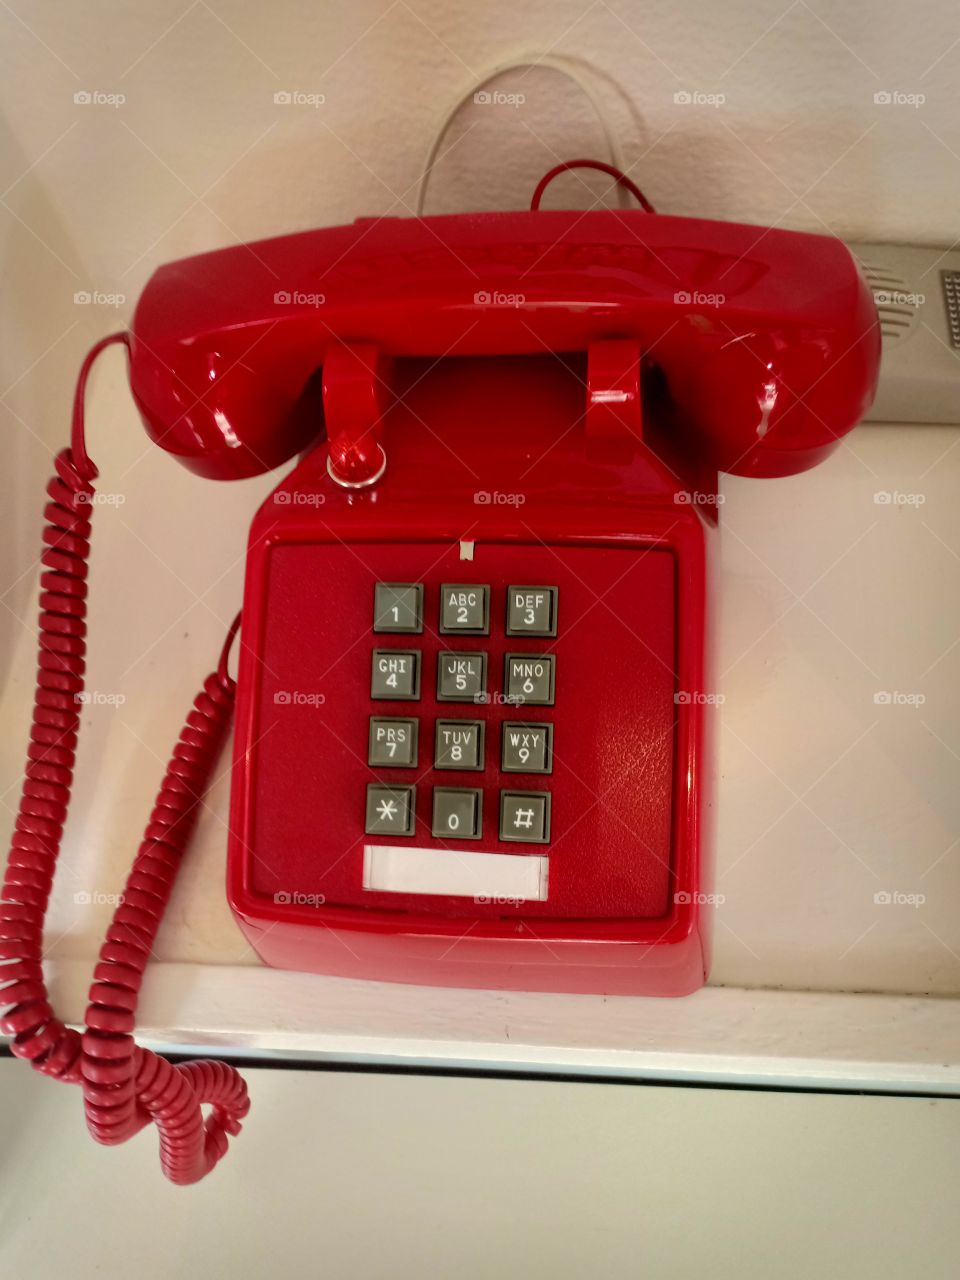 Red Antique Telephone  Equipment or tools for communication  That people use and buy as collectibles.